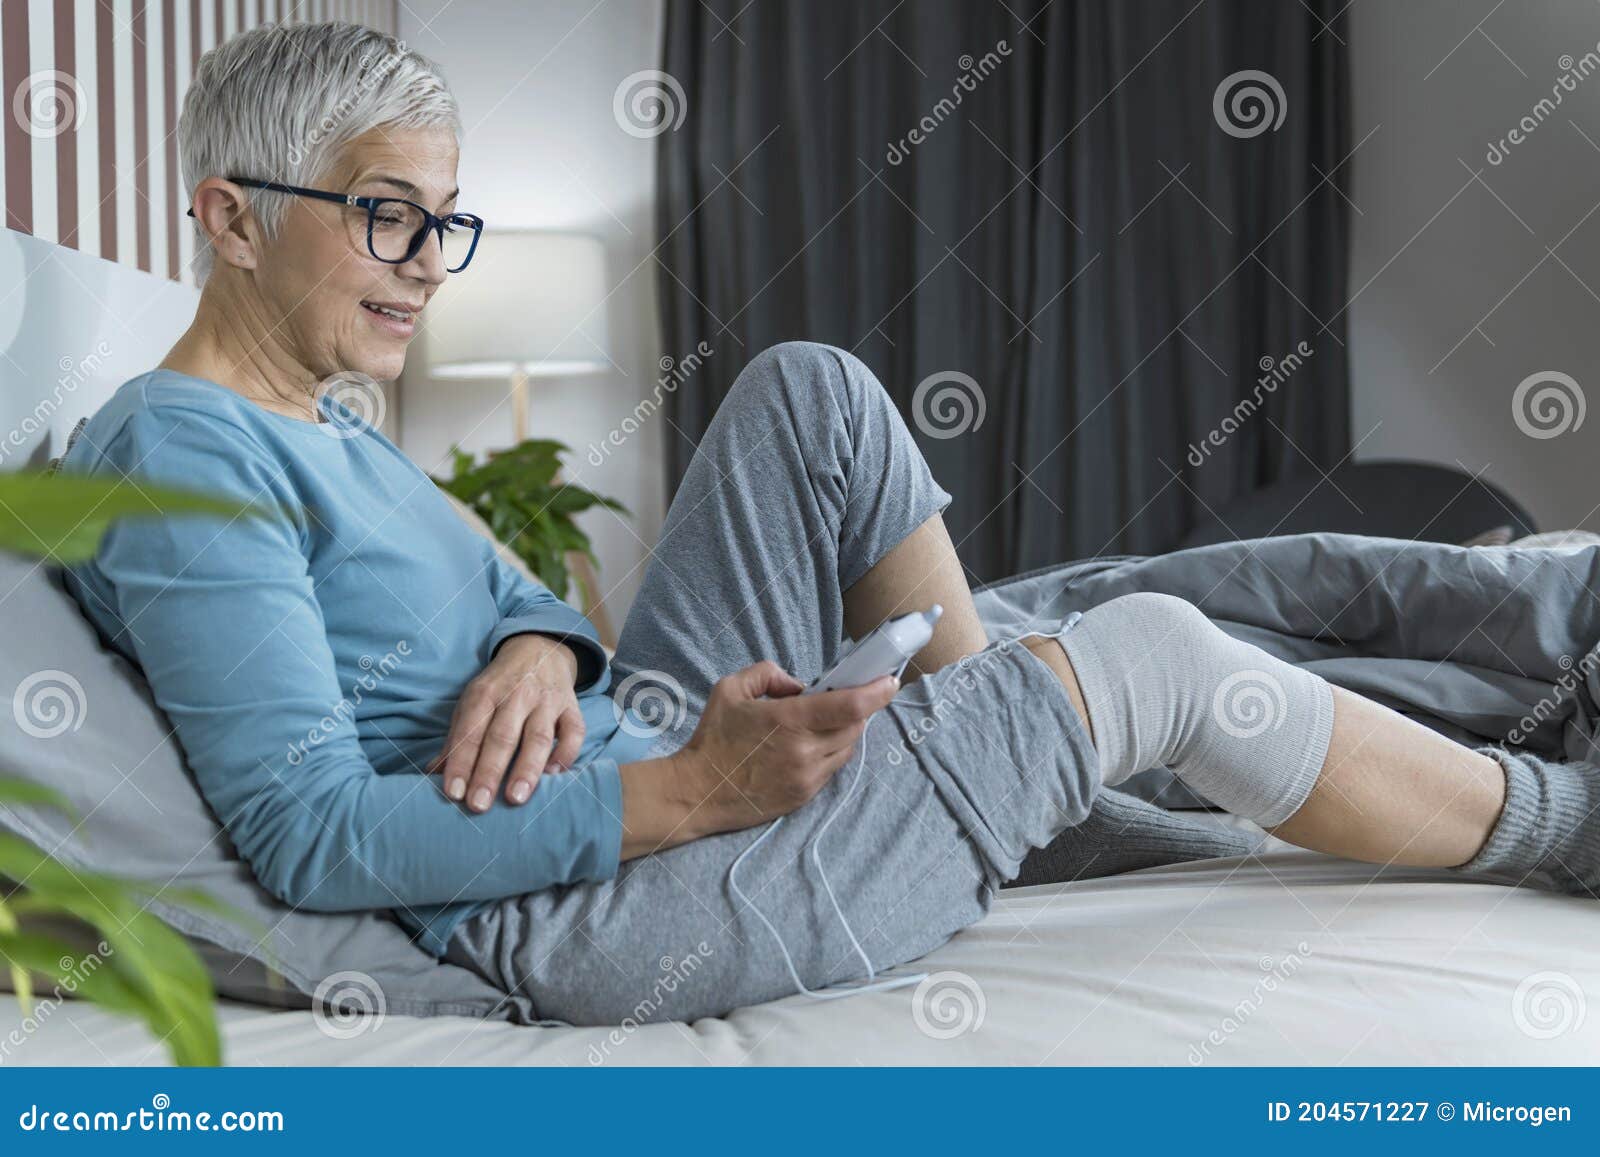 Patient Applying Electrical Stimulation Therapy on Knee Joint. T Stock  Image - Image of pain, equipment: 124785799